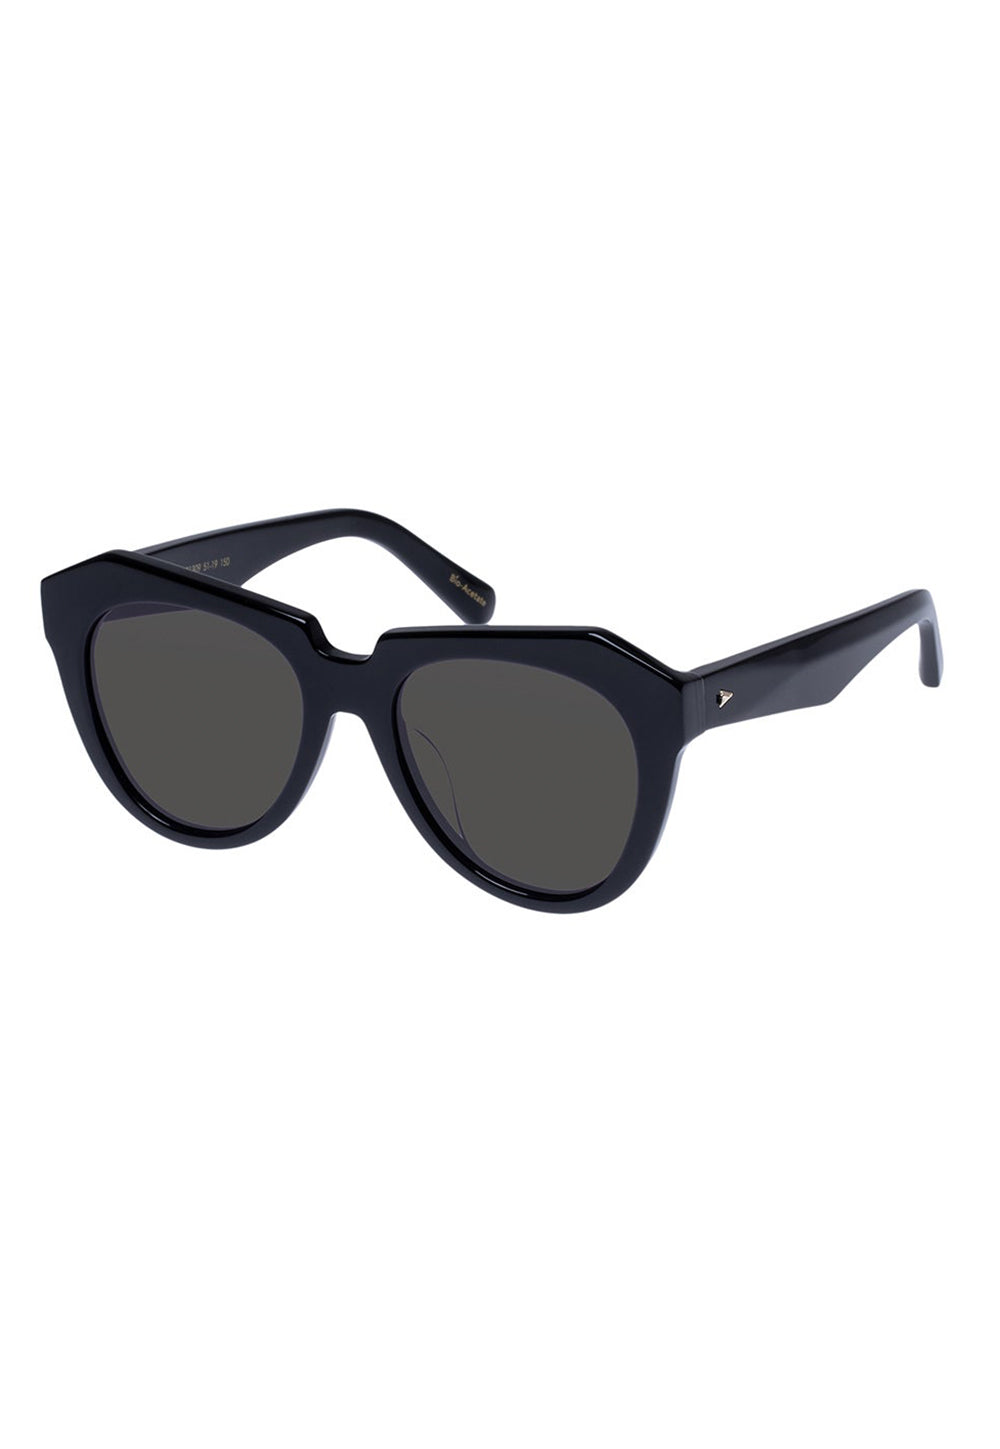 Number One Sunglasses - Black sold by Angel Divine